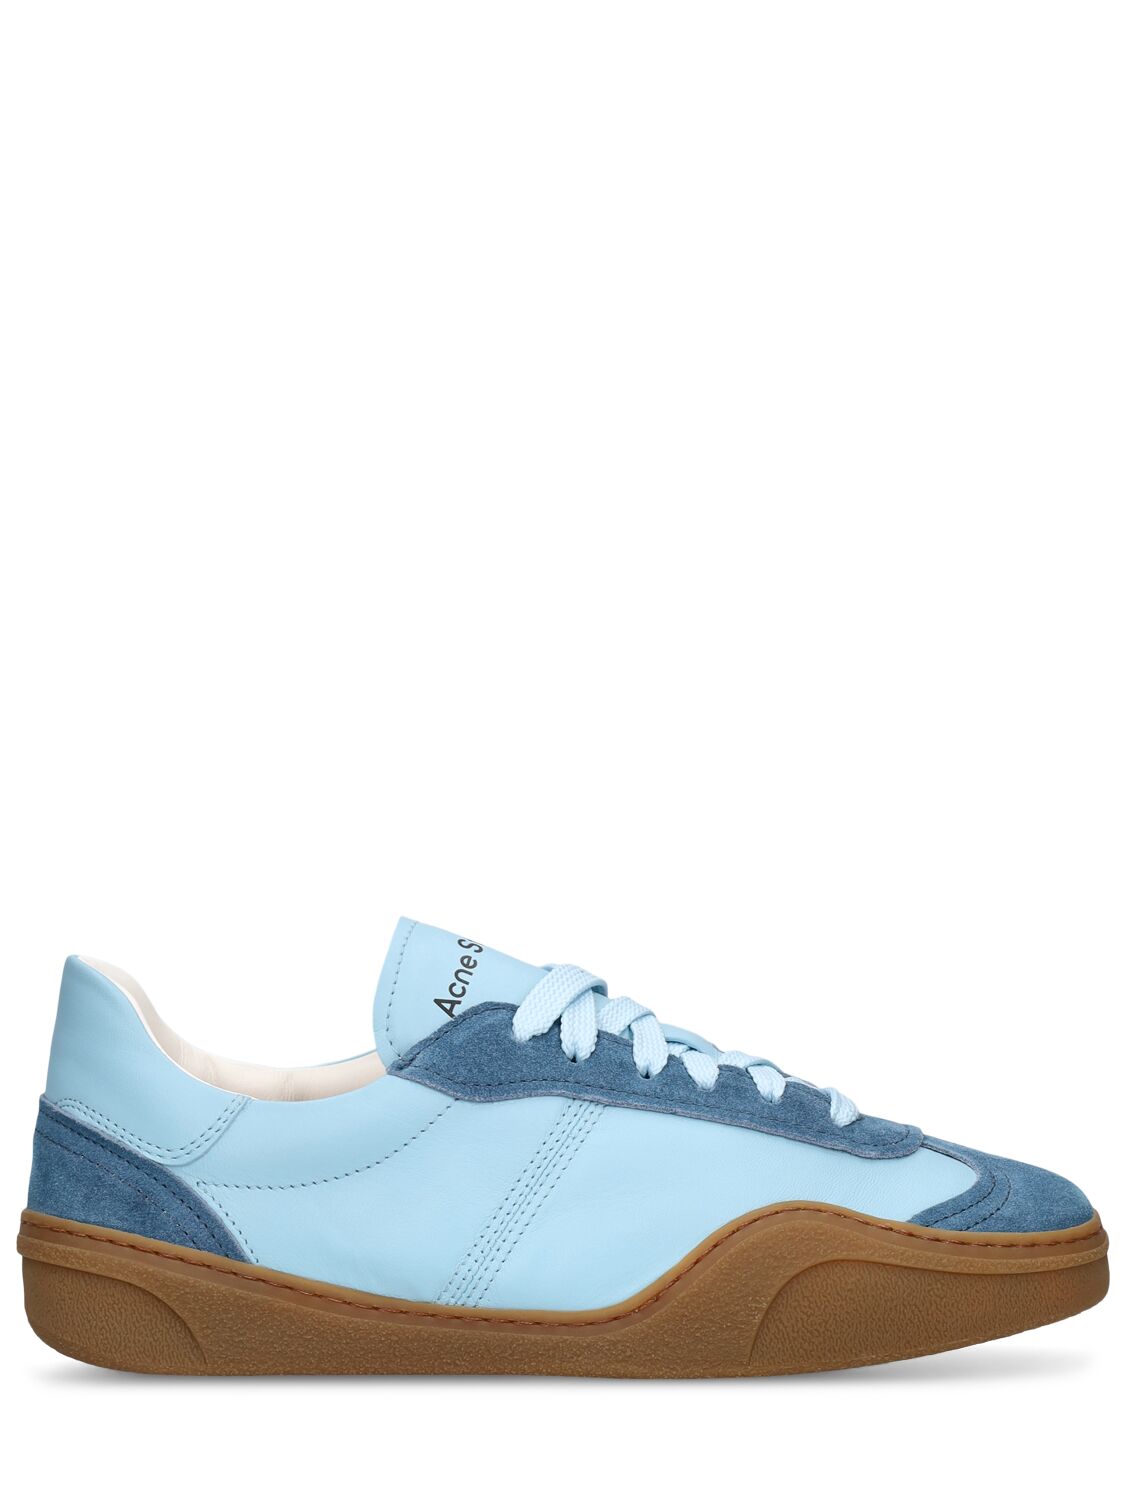 Acne Studios Bars Leather Sneakers In Light Blue,tan